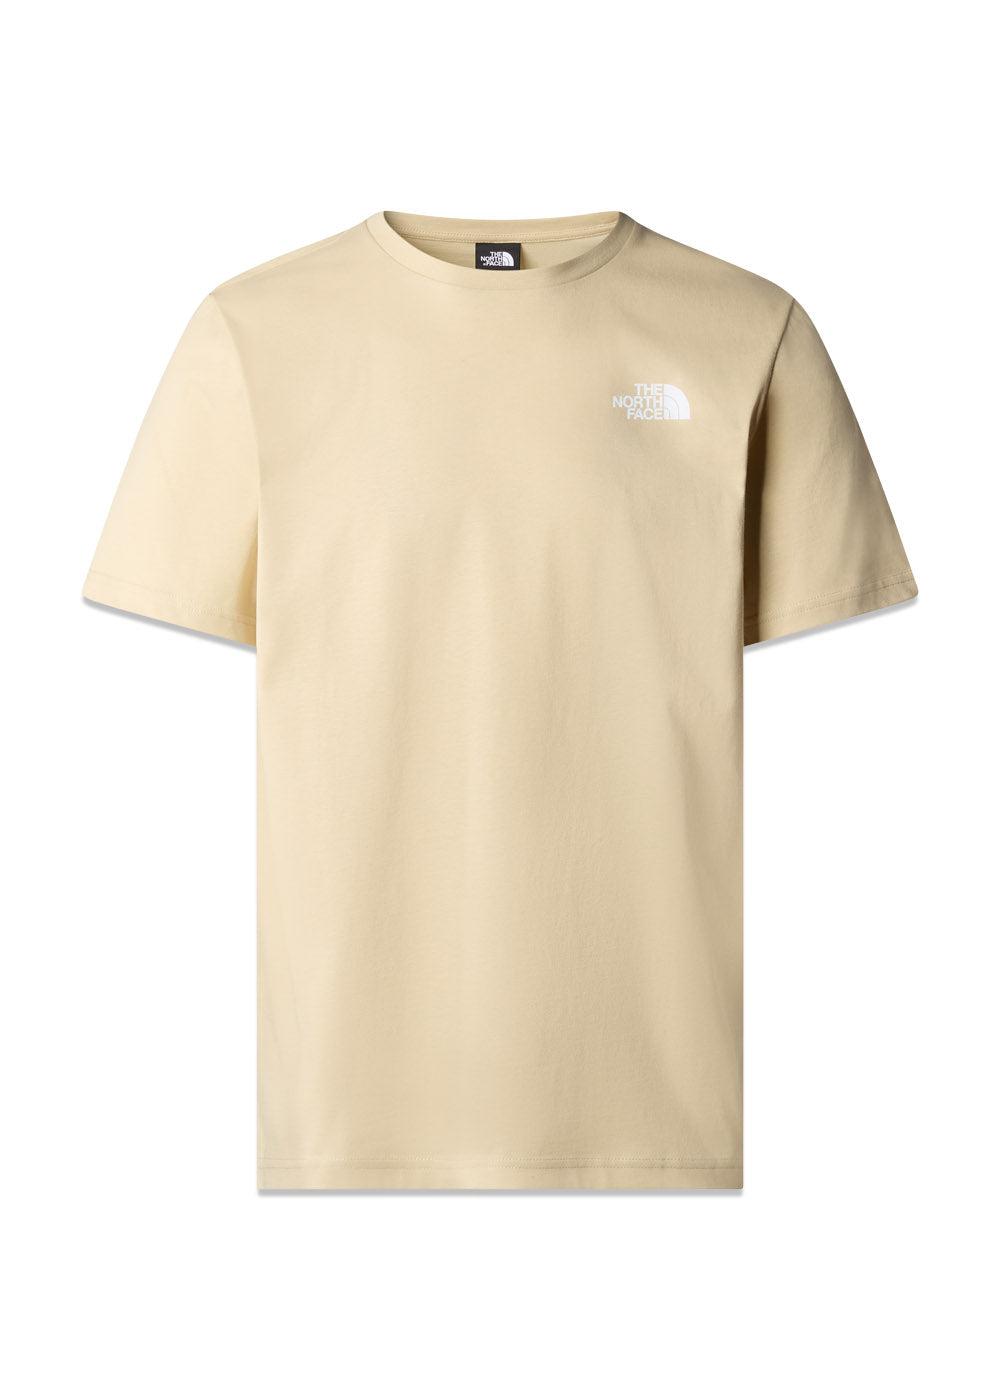 THE NORTH FACE REDBOX TEE - Gravel